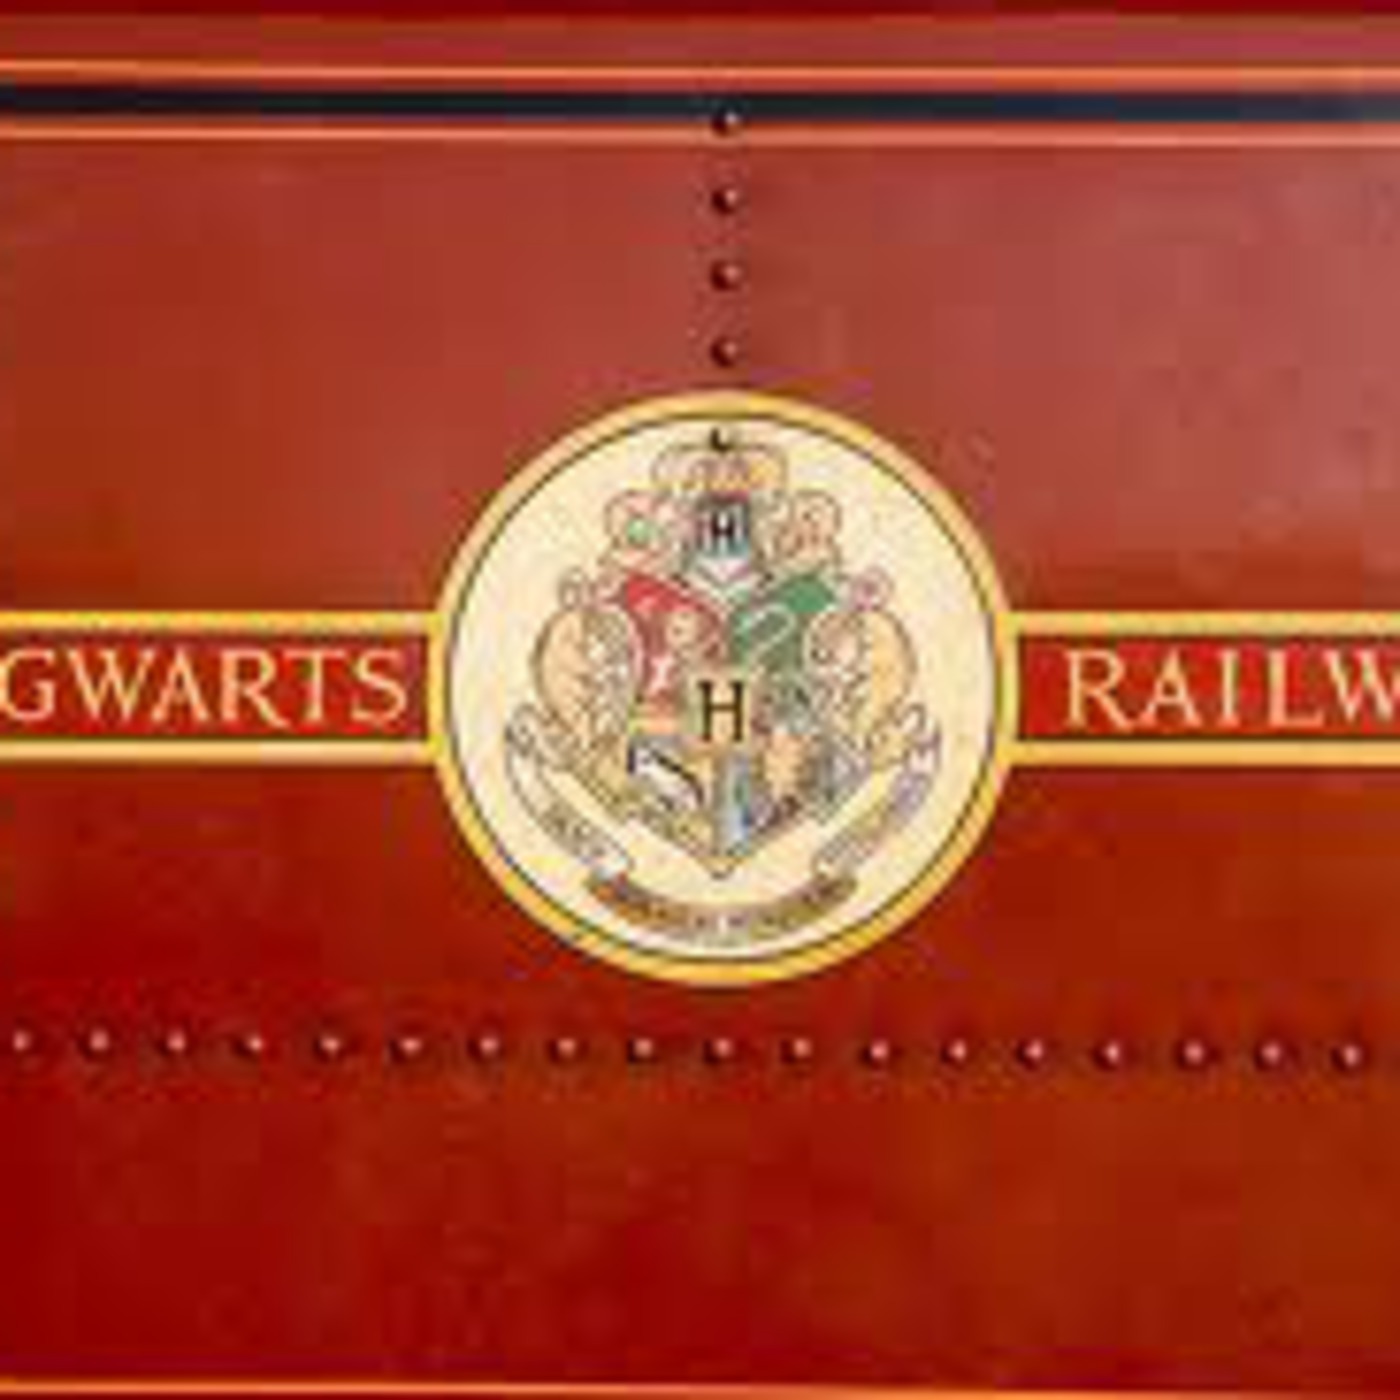 The Potter Express